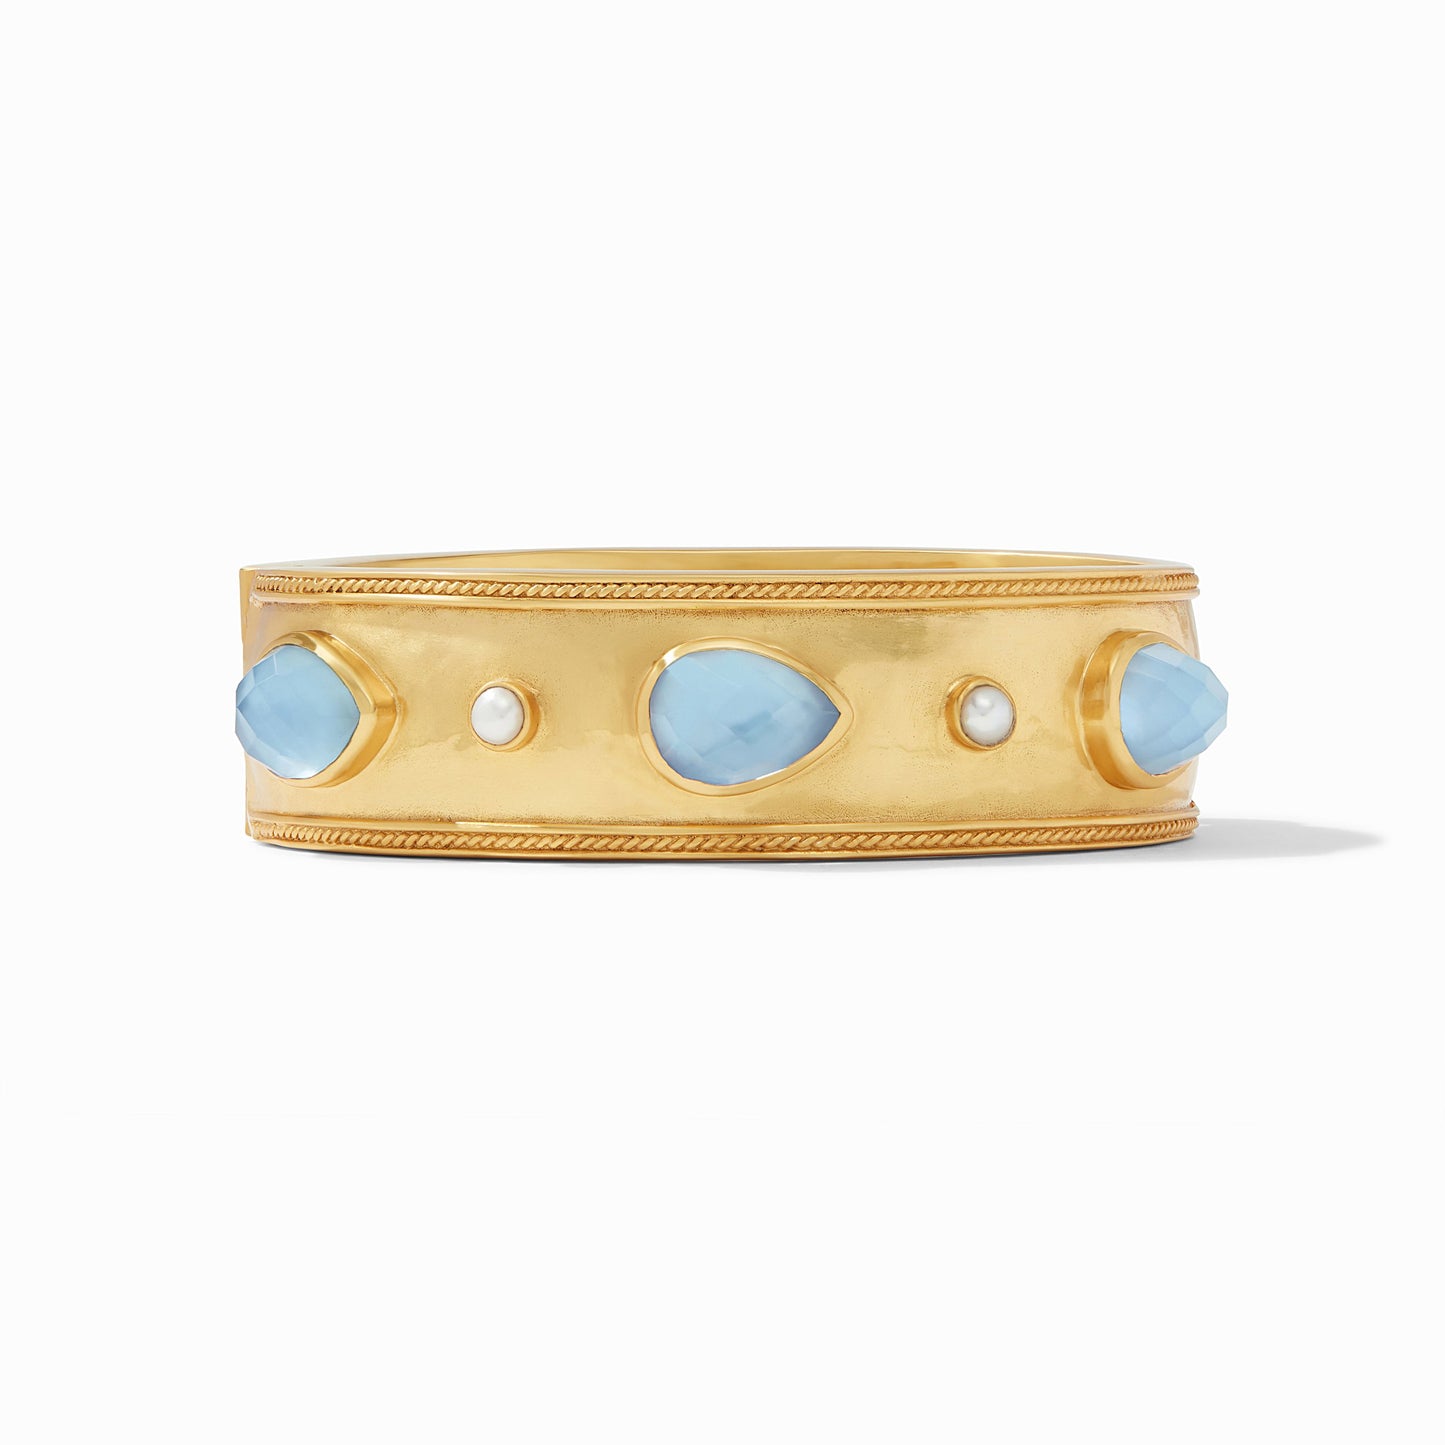 Julie Vos Julie Vos - Cassis Statement Hinge Bangle Bracelet Gold Iridescent Chalcedony Blue with Pearl accents available at The Good Life Boutique